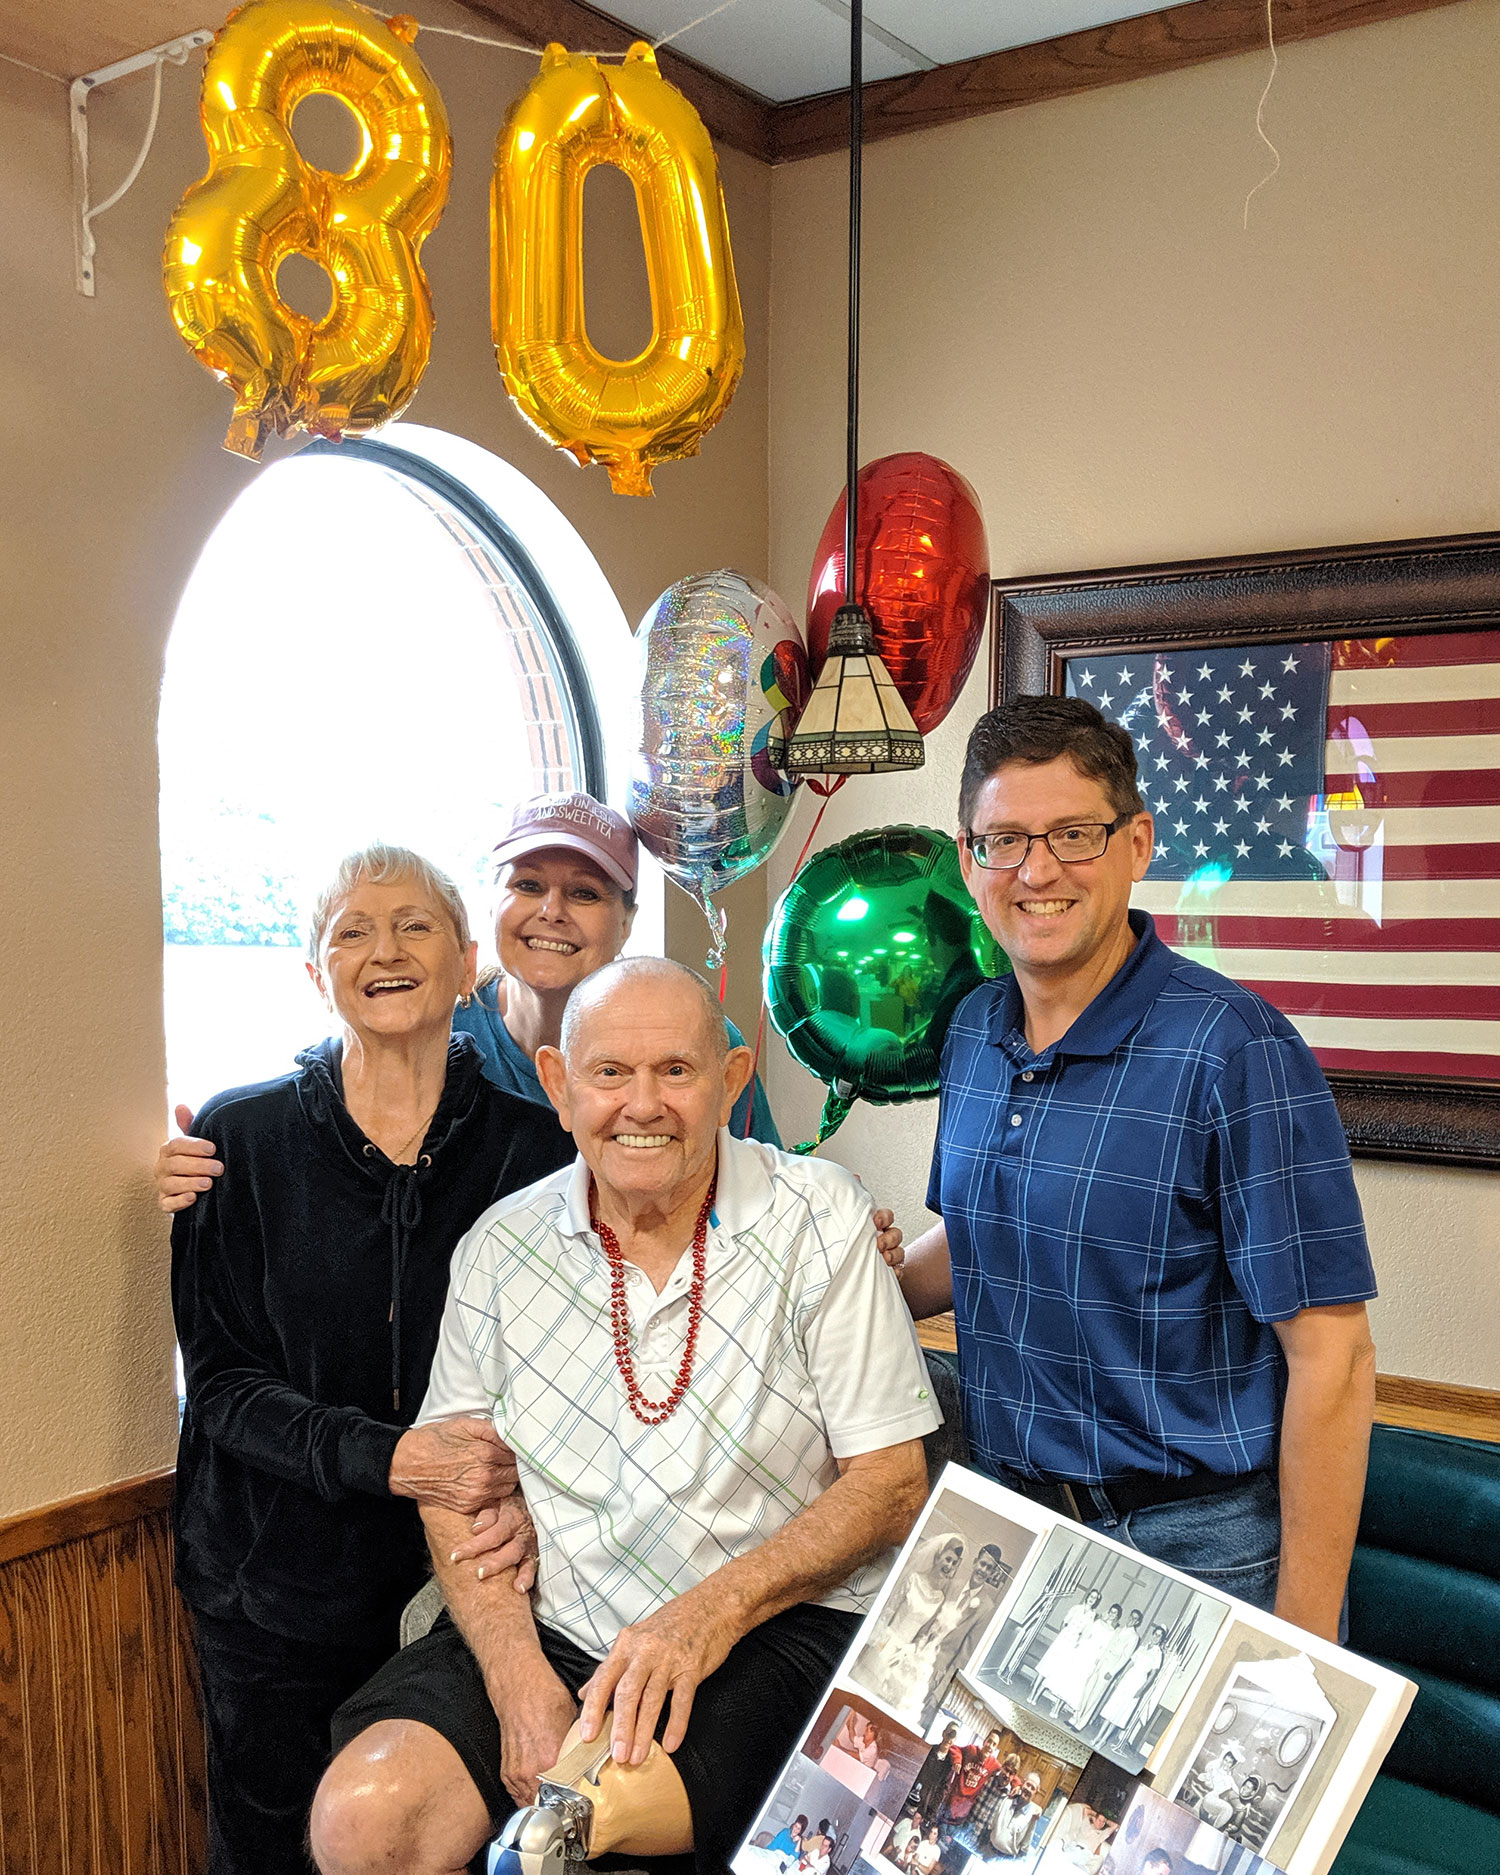 Jerry celebrating his 80th birthday in the restaurant last year with wife Wanda, daughter Linda and son-in-law Aaron // photo Jennifer Shertzer